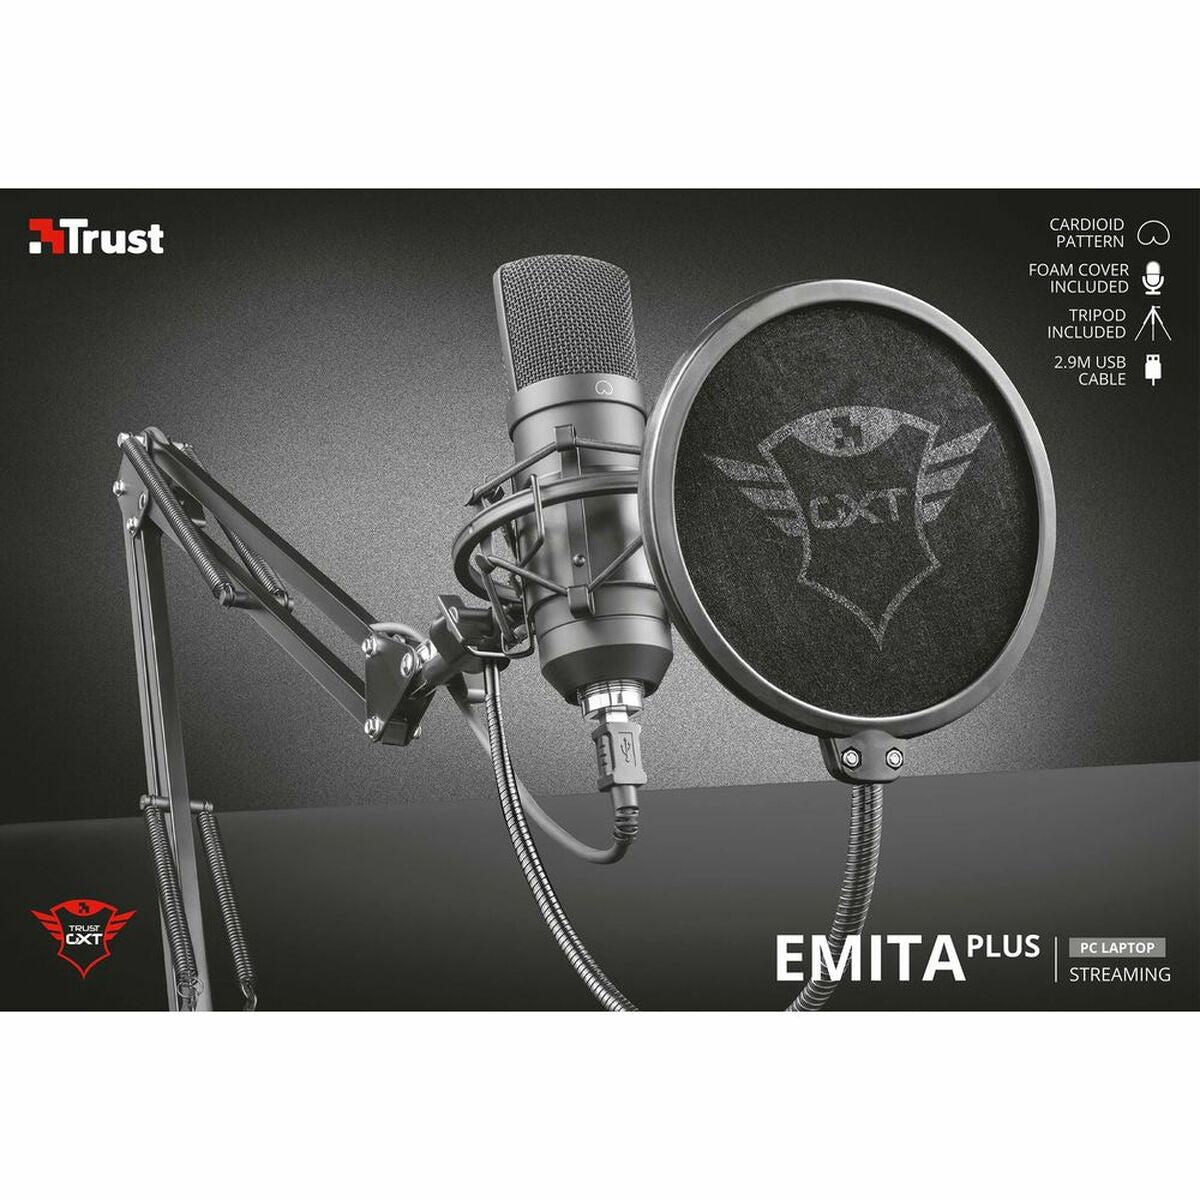 Microphone Trust 22400 GXT252EMI, Trust, Electronics, Photography and video cameras, microphone-trust-22400-gxt252emi, Brand_Trust, category-reference-2609, category-reference-2932, category-reference-2936, category-reference-t-19653, category-reference-t-8122, category-reference-t-8123, category-reference-t-8191, Condition_NEW, fotografía, Price_100 - 200, travel, RiotNook